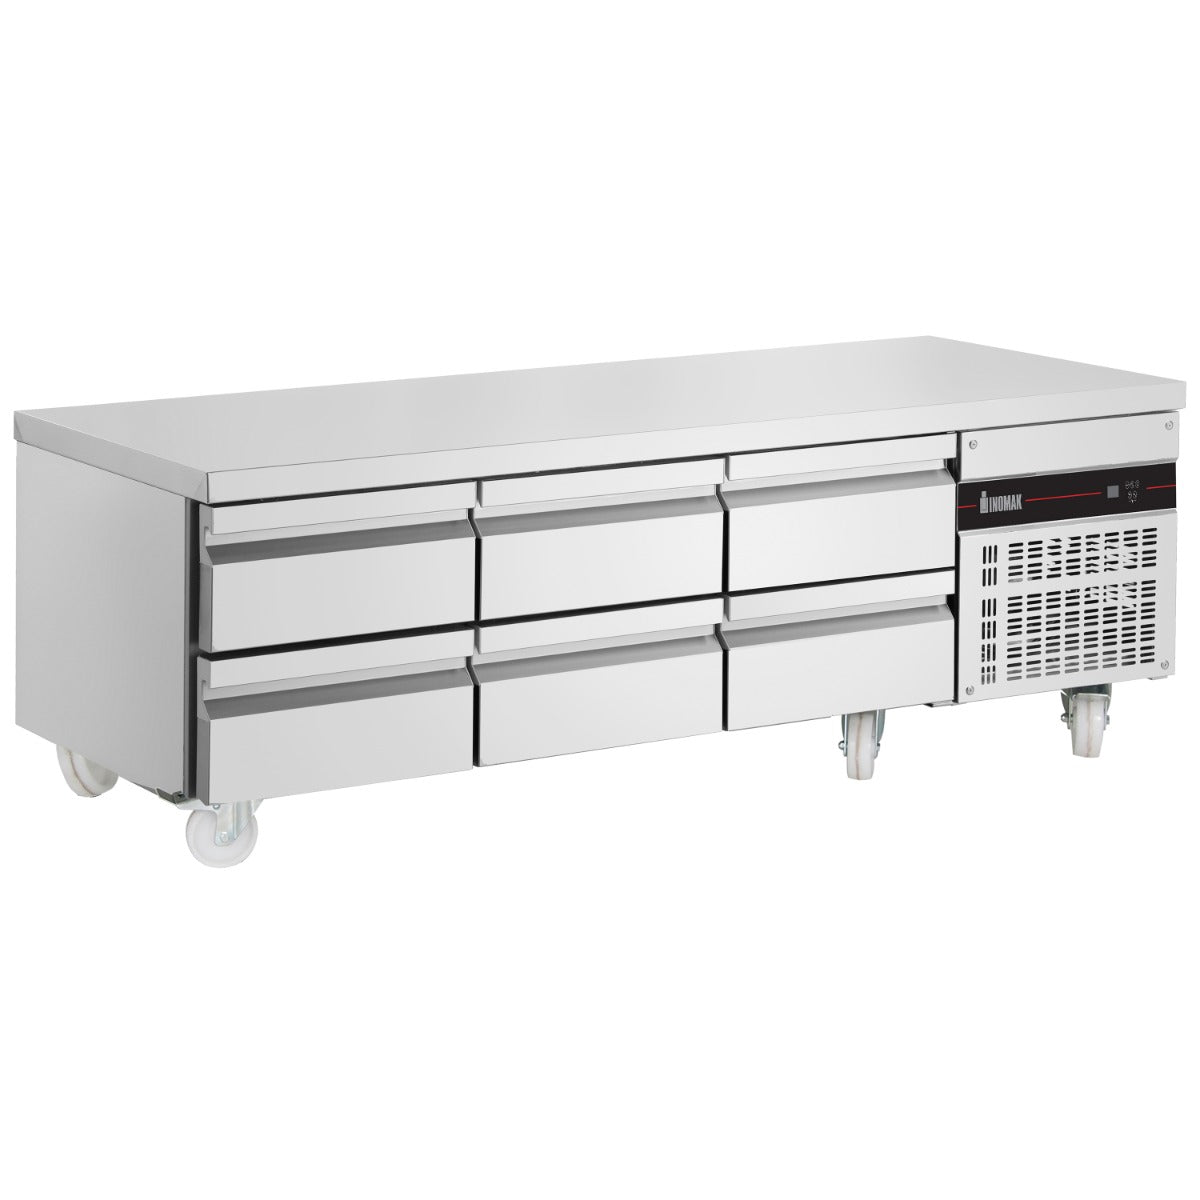 Inomak 6 DRAWER LOW HEIGHT 620MM SNACK COUNTER 246L